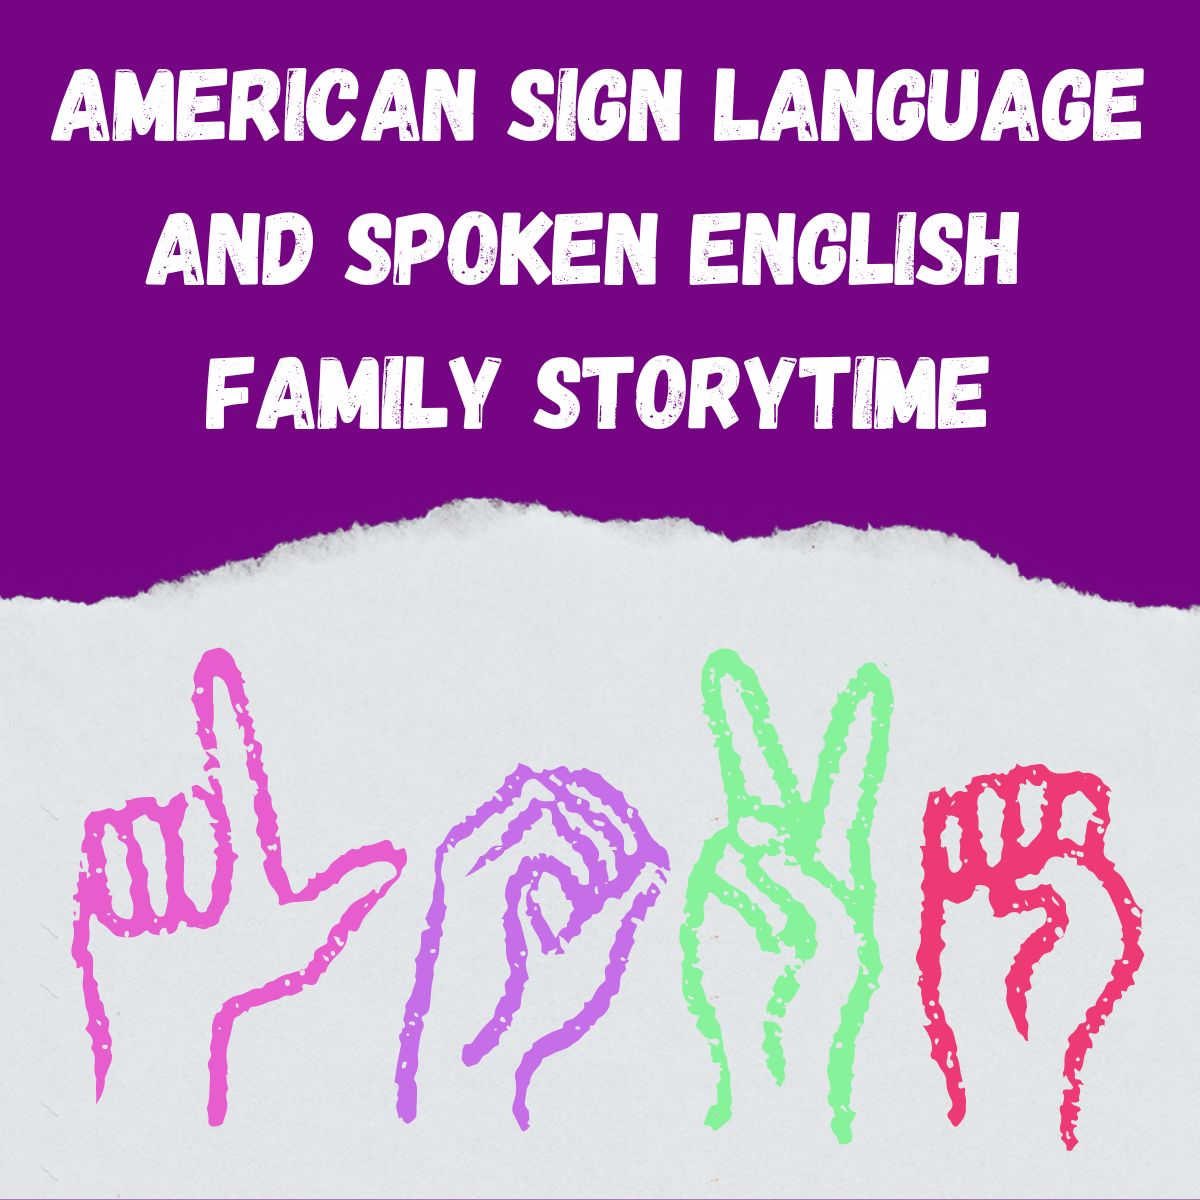 purple background with white text in the center says american sign language and spoken english family storytime. image on the bottom is a white torn paper with colorful hand signs spelling love